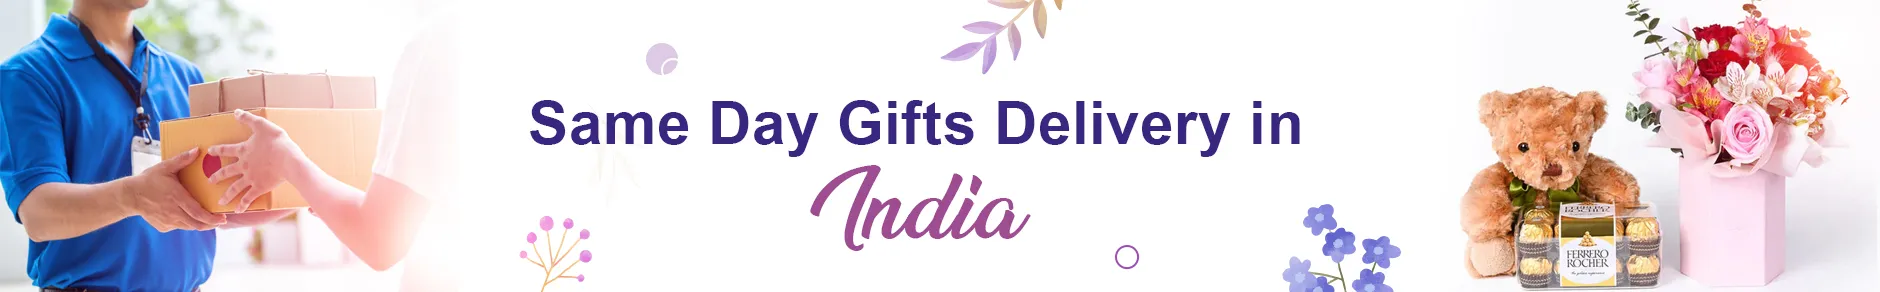 Sameday - Same Day Gifts Delivery in India